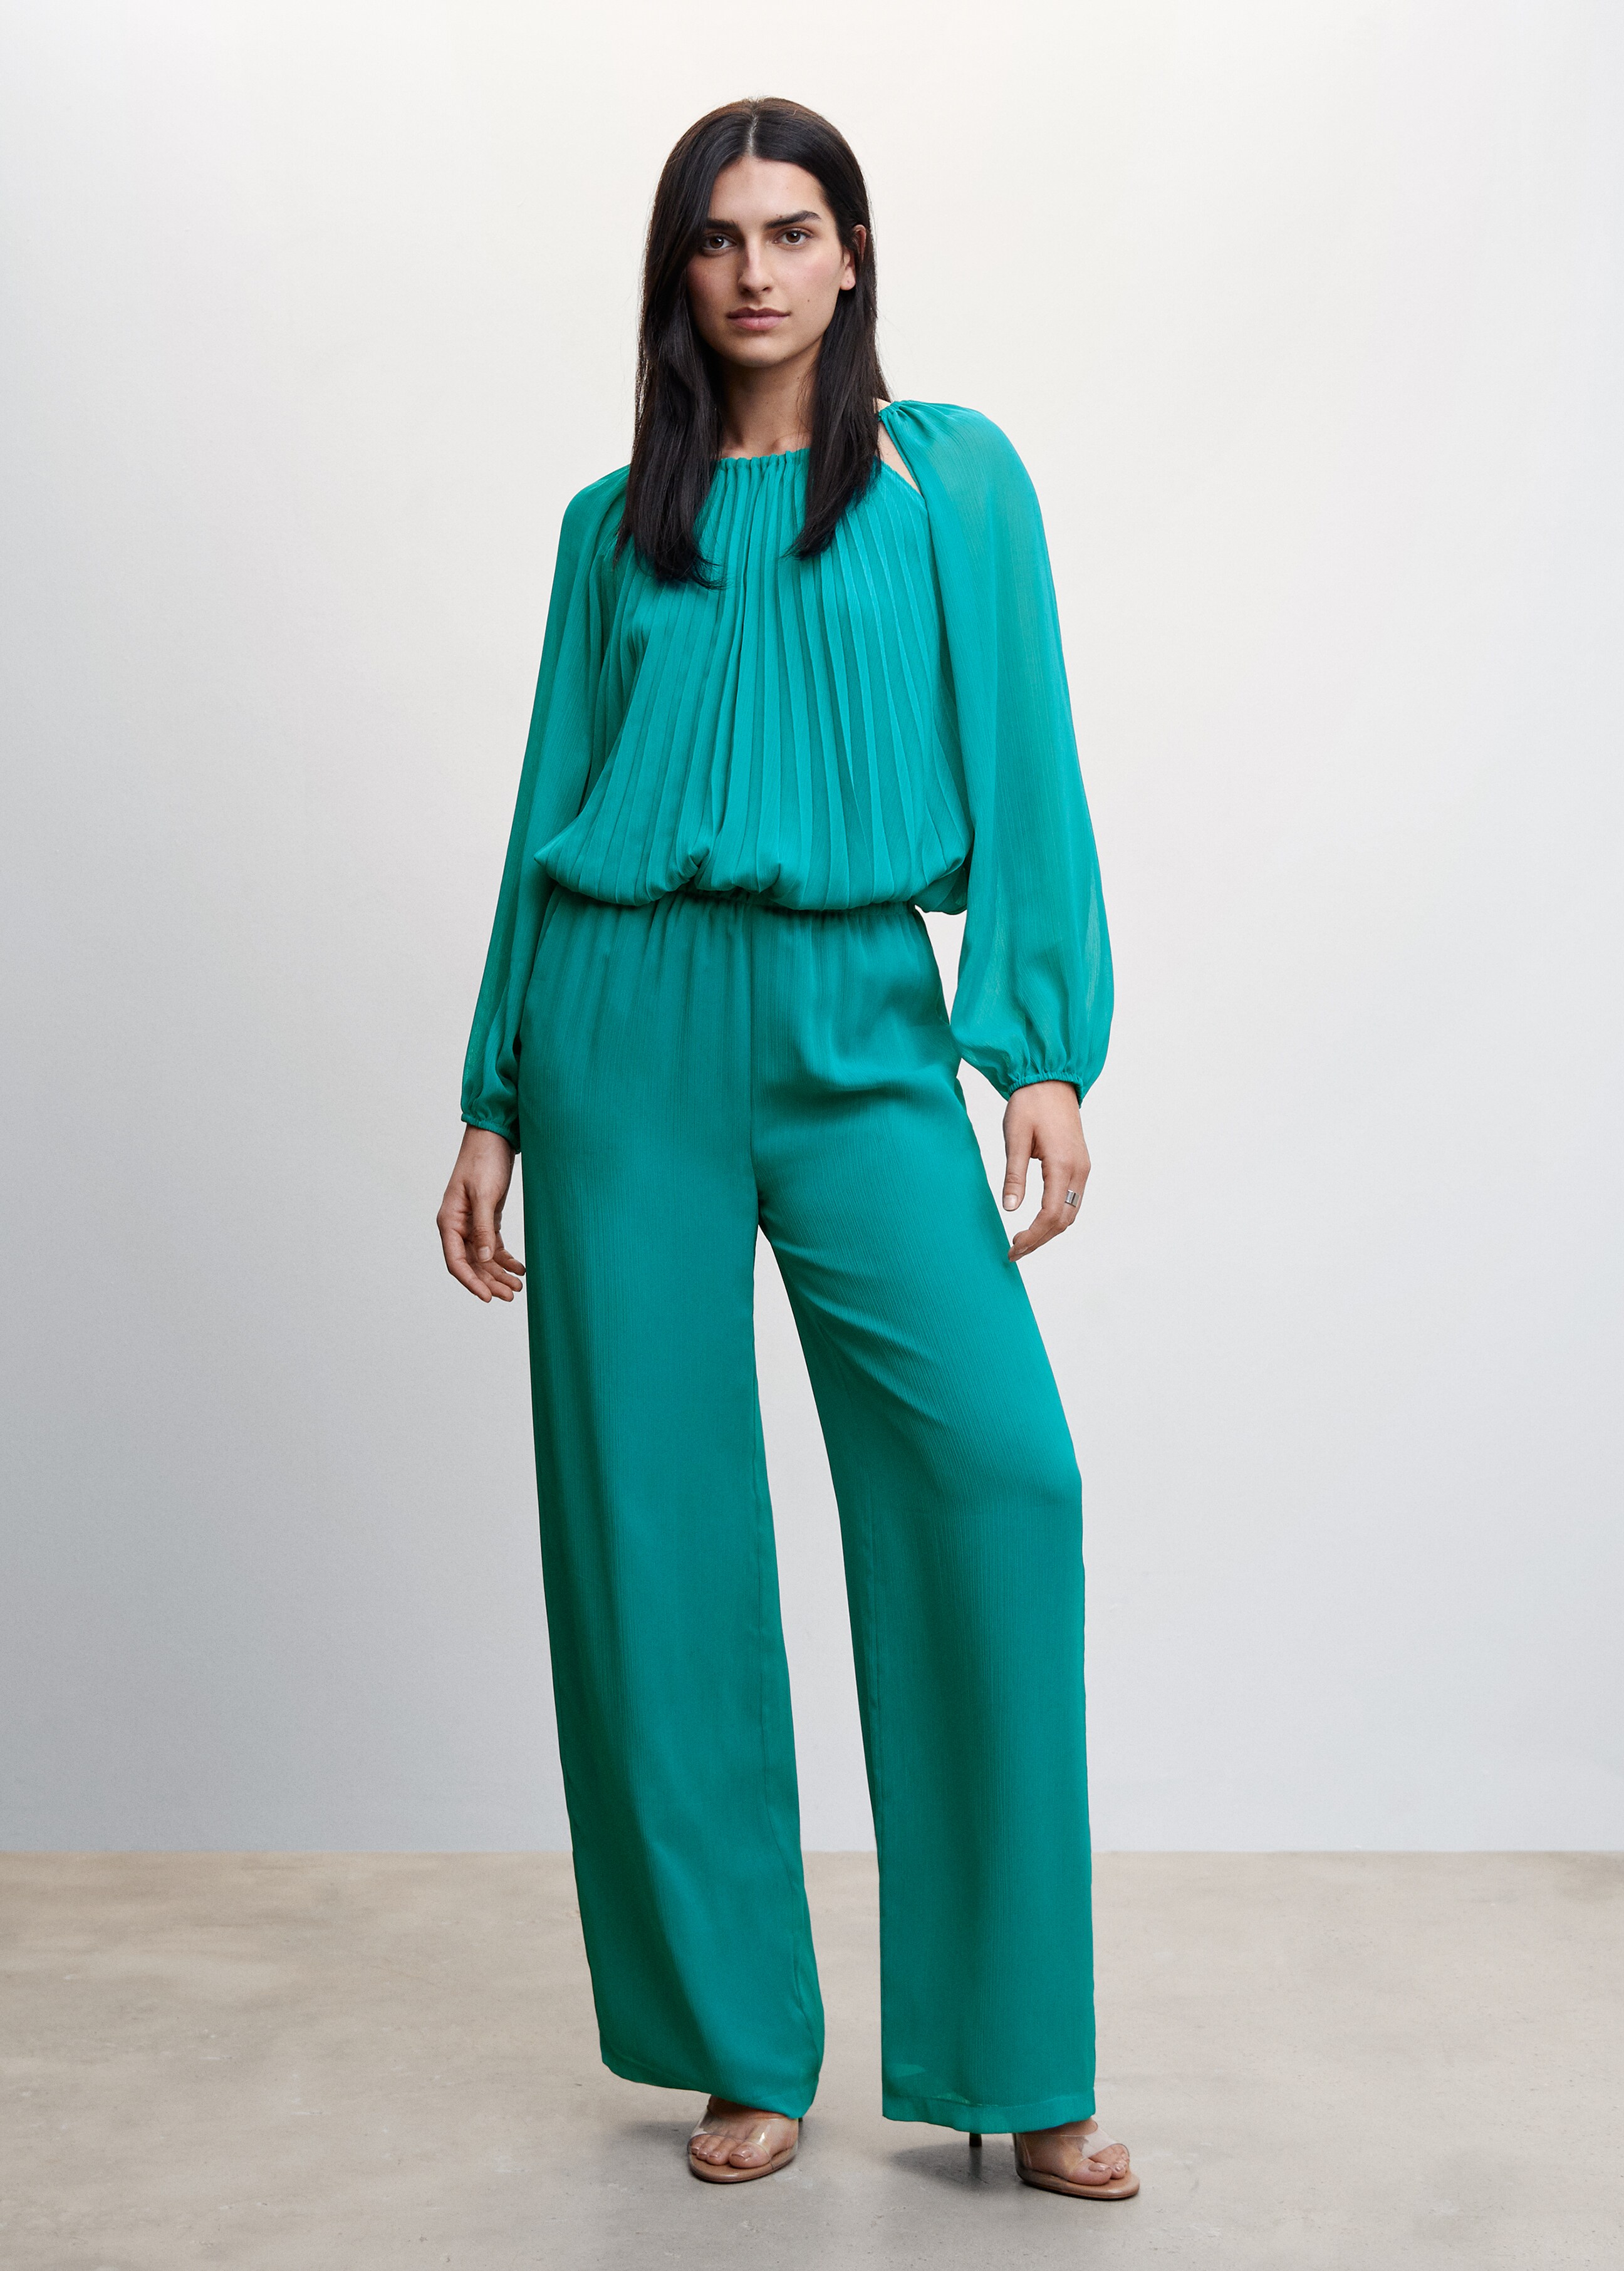 Textured palazzo trousers - General plane